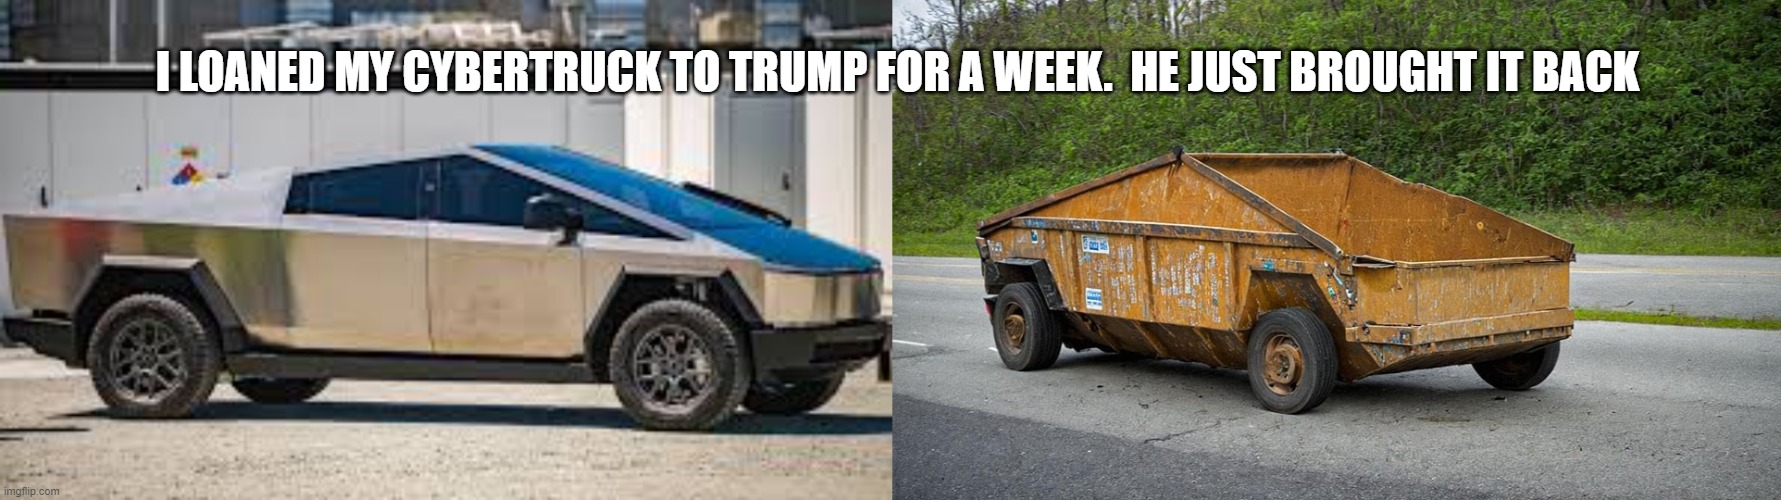 Cybertruck | I LOANED MY CYBERTRUCK TO TRUMP FOR A WEEK.  HE JUST BROUGHT IT BACK | made w/ Imgflip meme maker